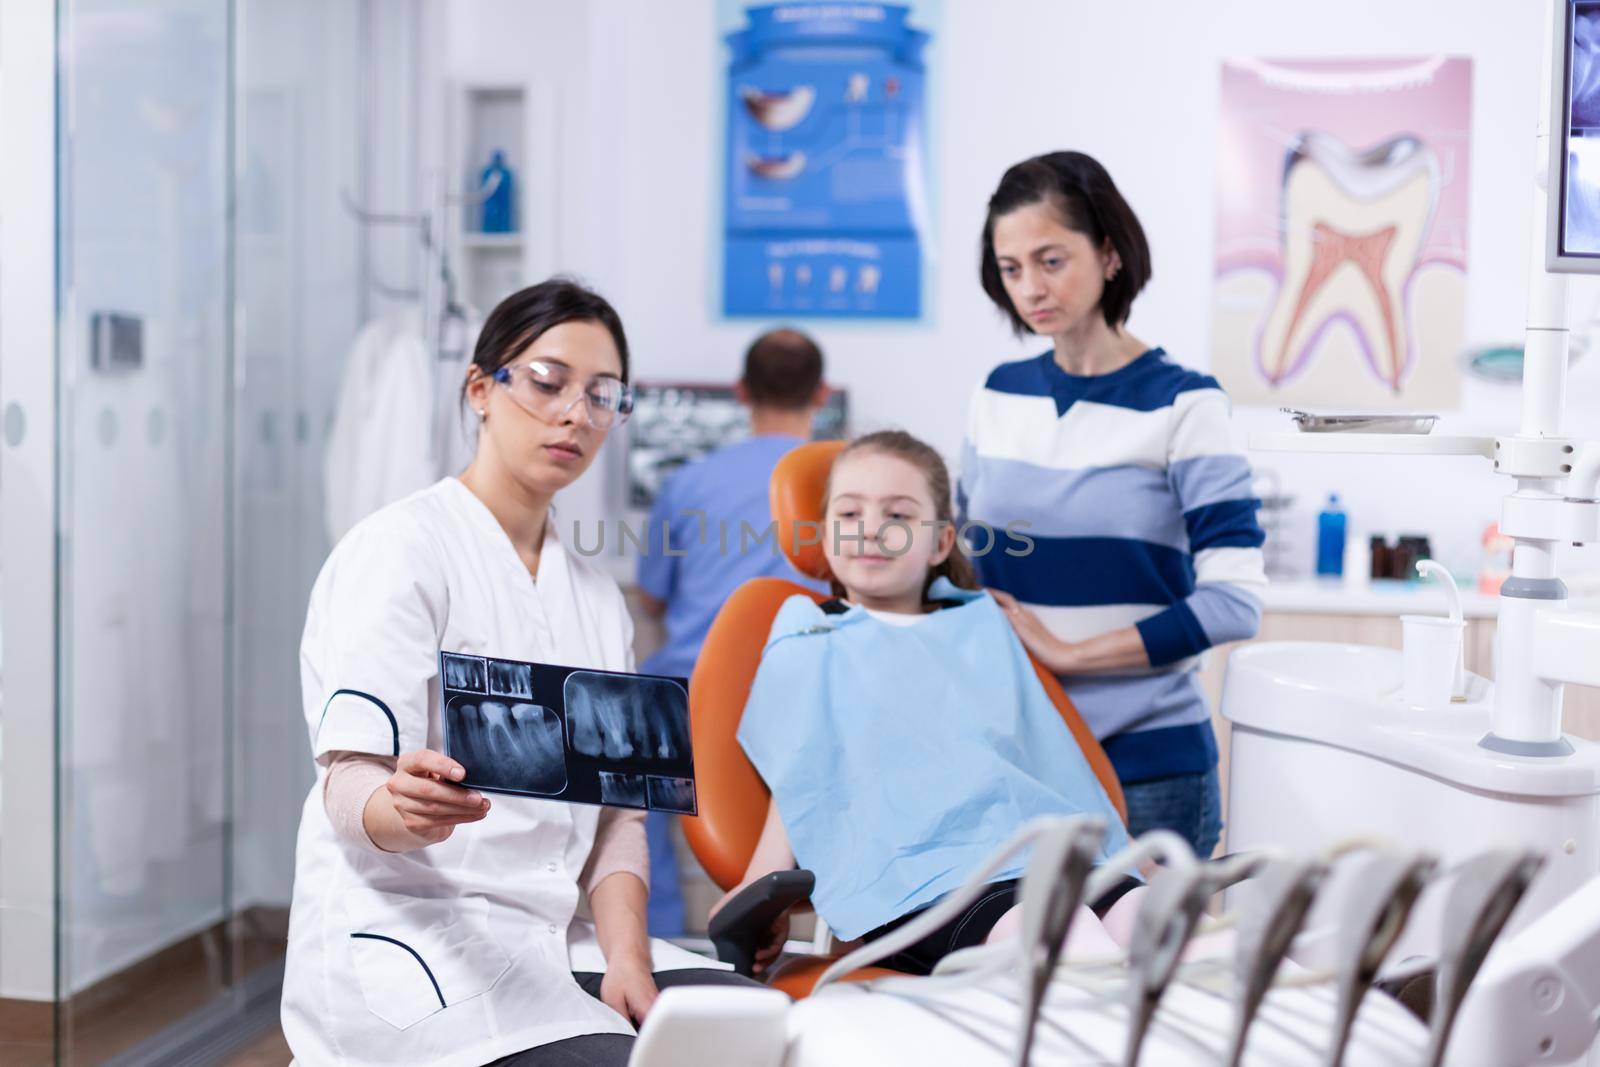 Parent and kid in dentistiry office looking at dental radiography by DCStudio